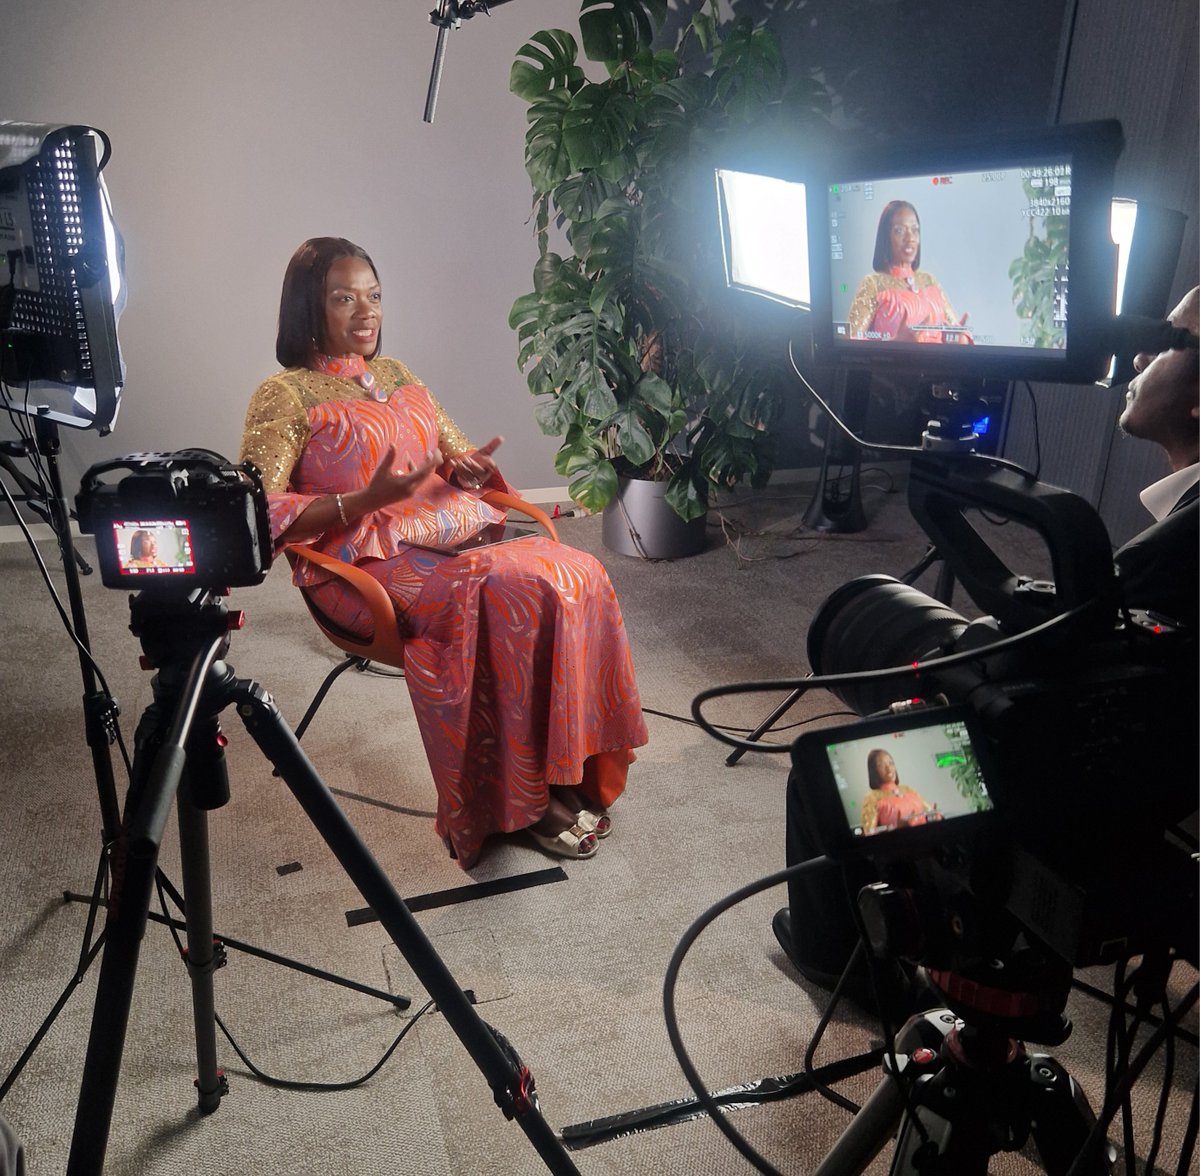 As #WHA77 continues in Geneva, Switzerland, take a look behind the scenes. @GlobalFund was honored to interview Zambia Minster of Health Sylvia Masebo about the power of global health partnerships and how governments can prioritize investments in health. @SylviaTMasebo